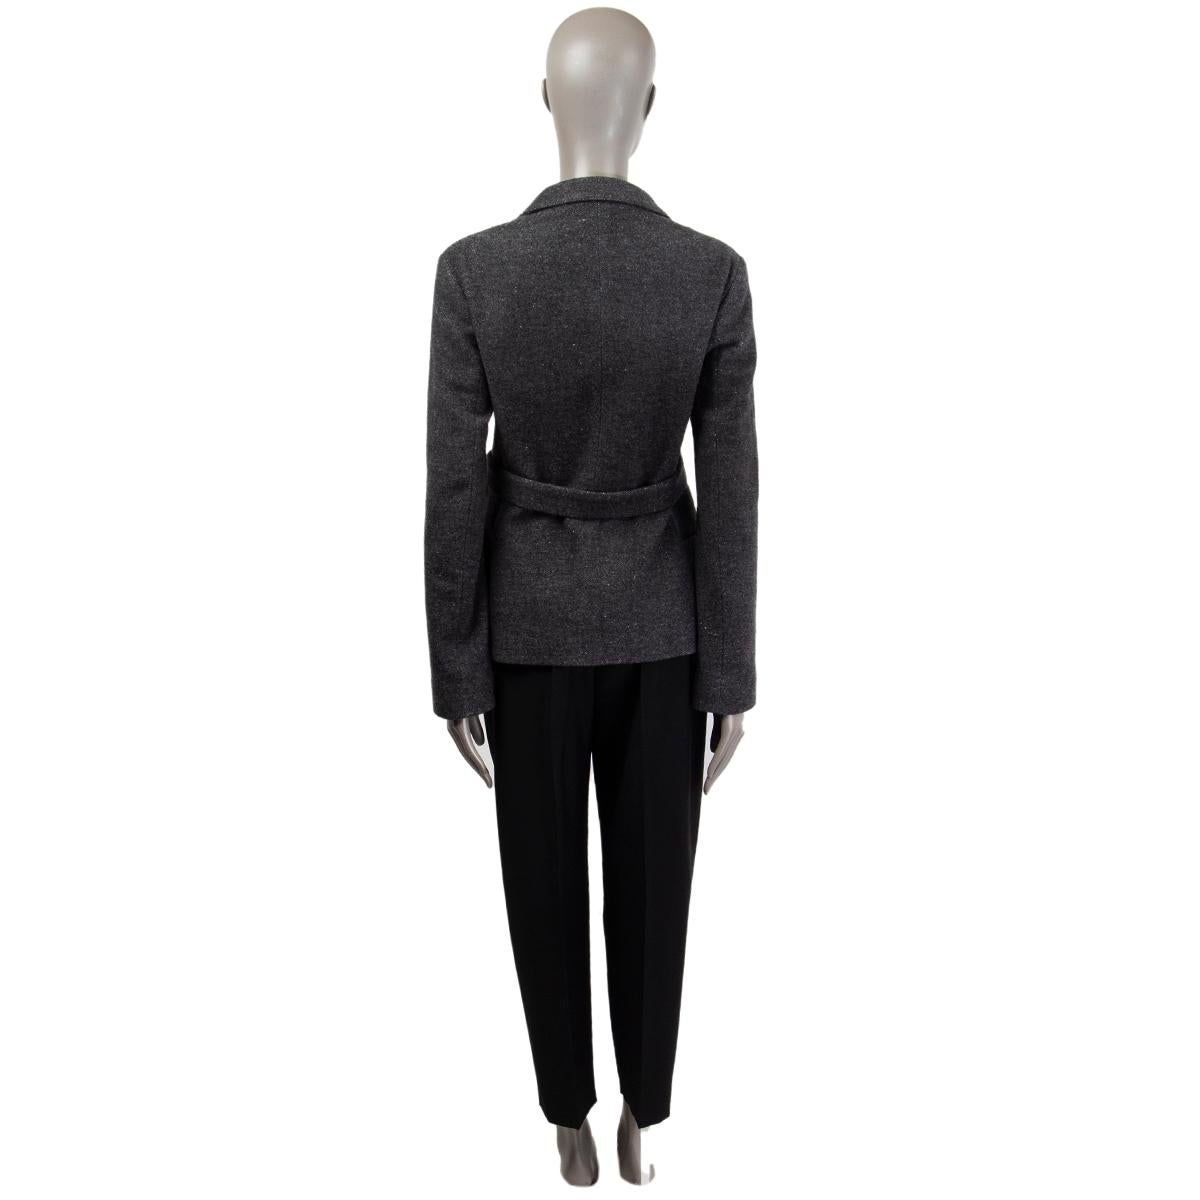 JIL SANDER grey wool & cashmere Buttoned Jacket 36 S In Excellent Condition For Sale In Zürich, CH